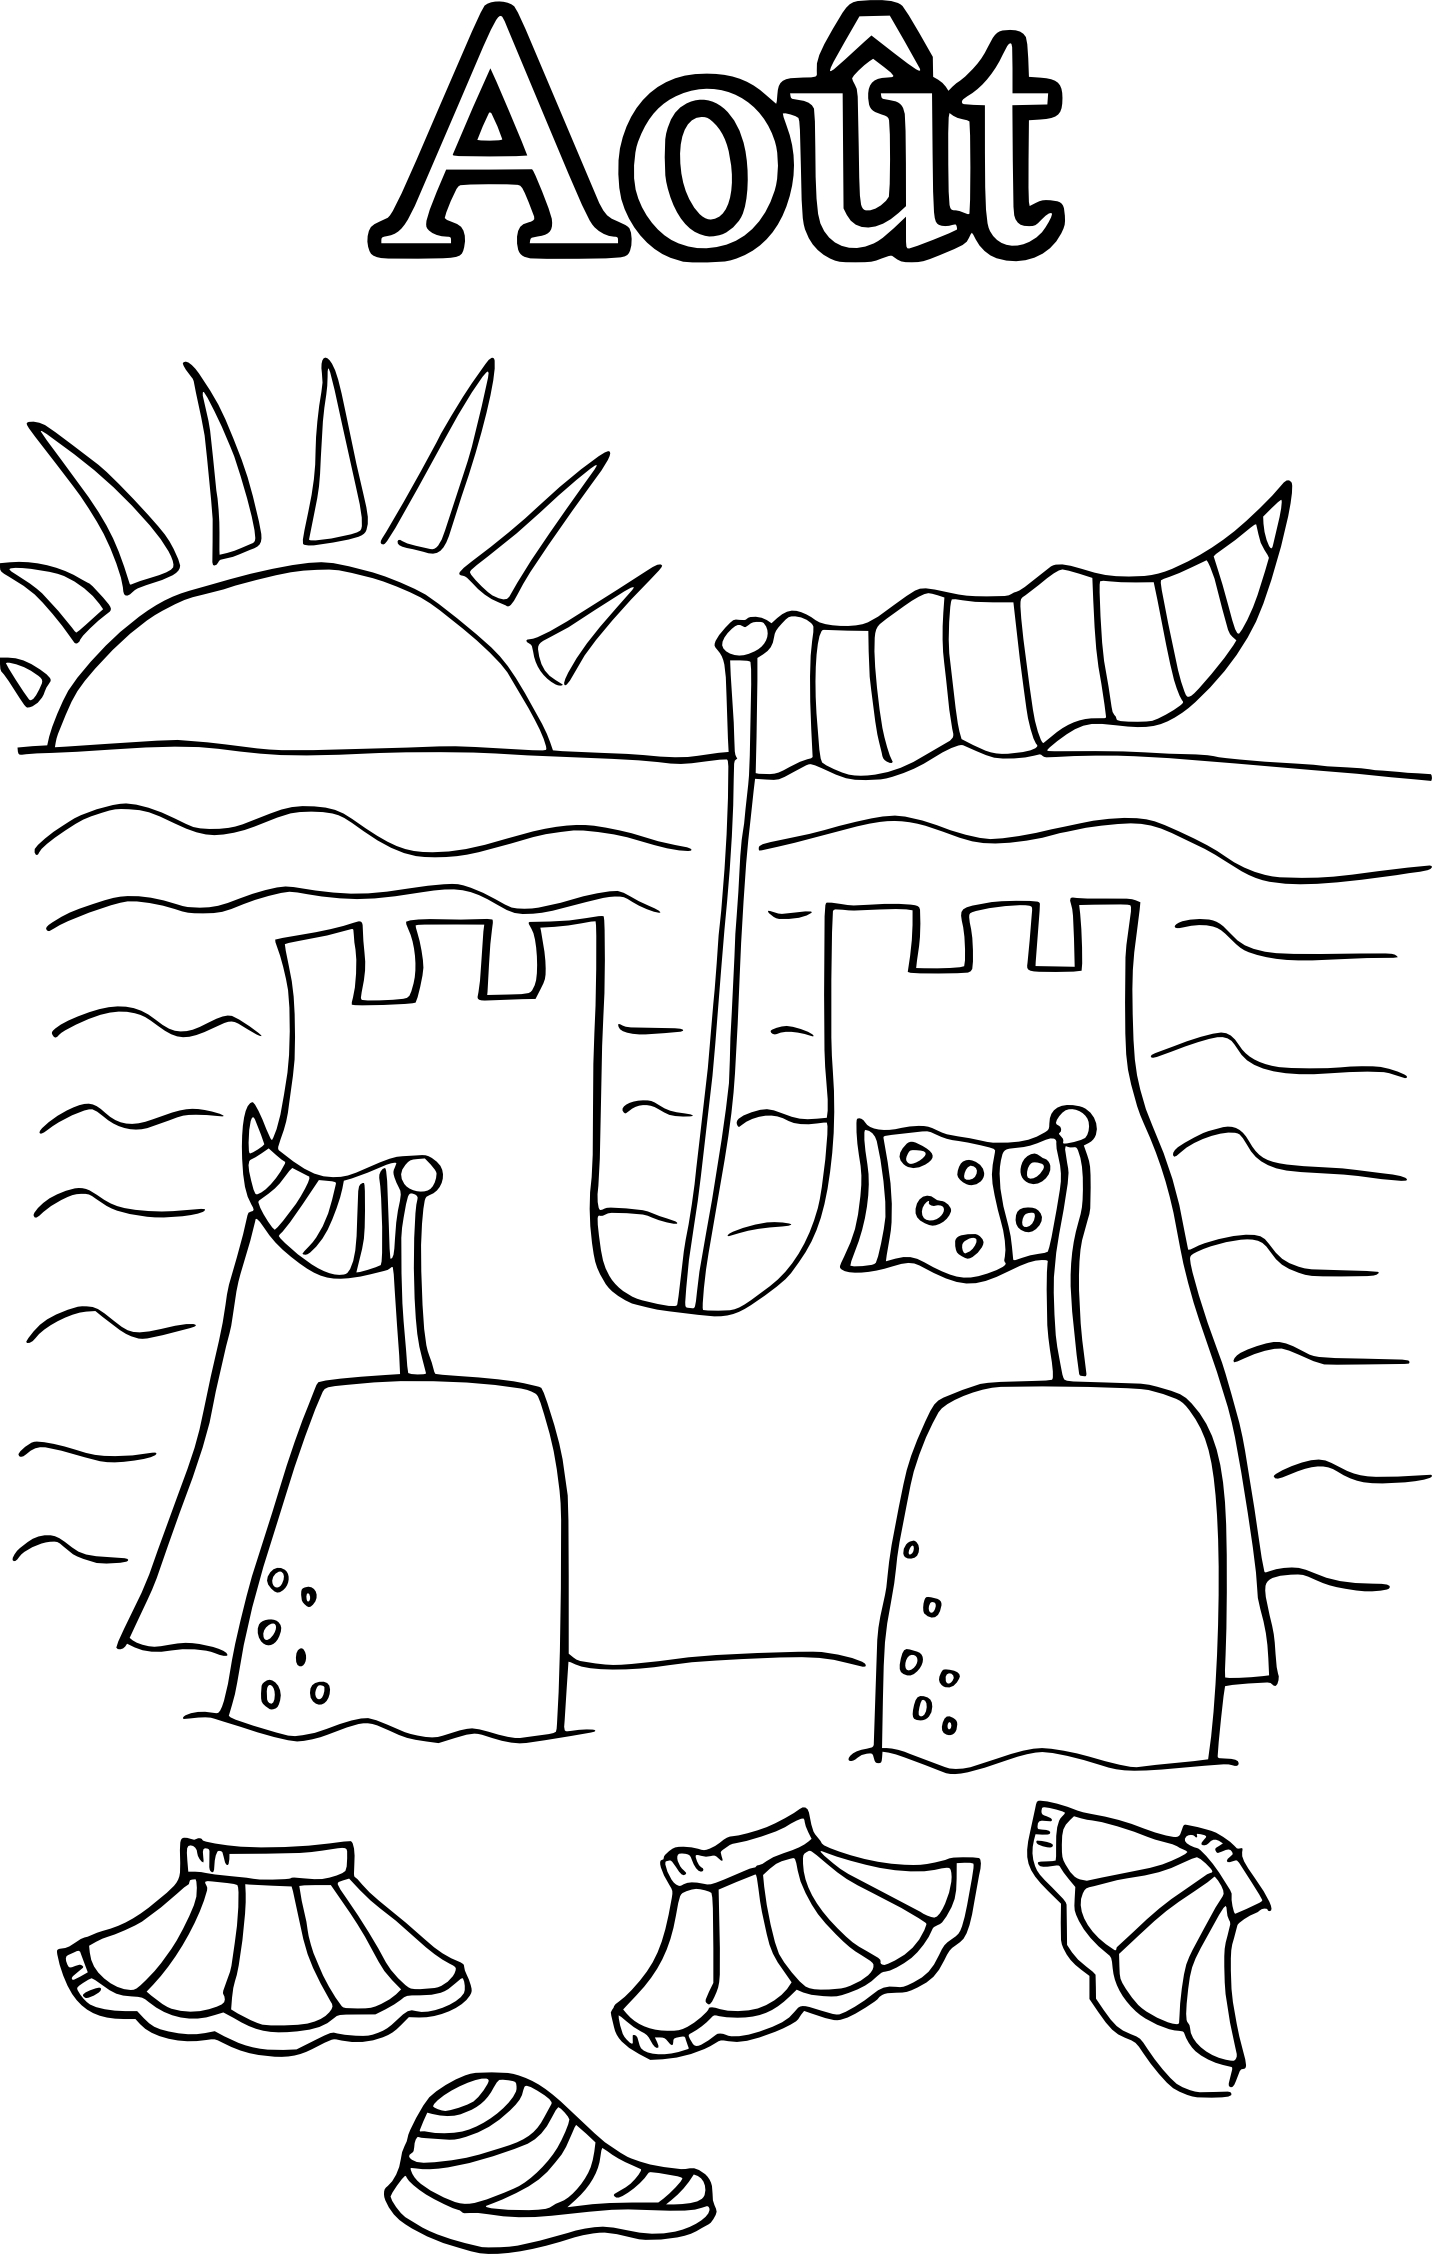 Month Of August coloring page